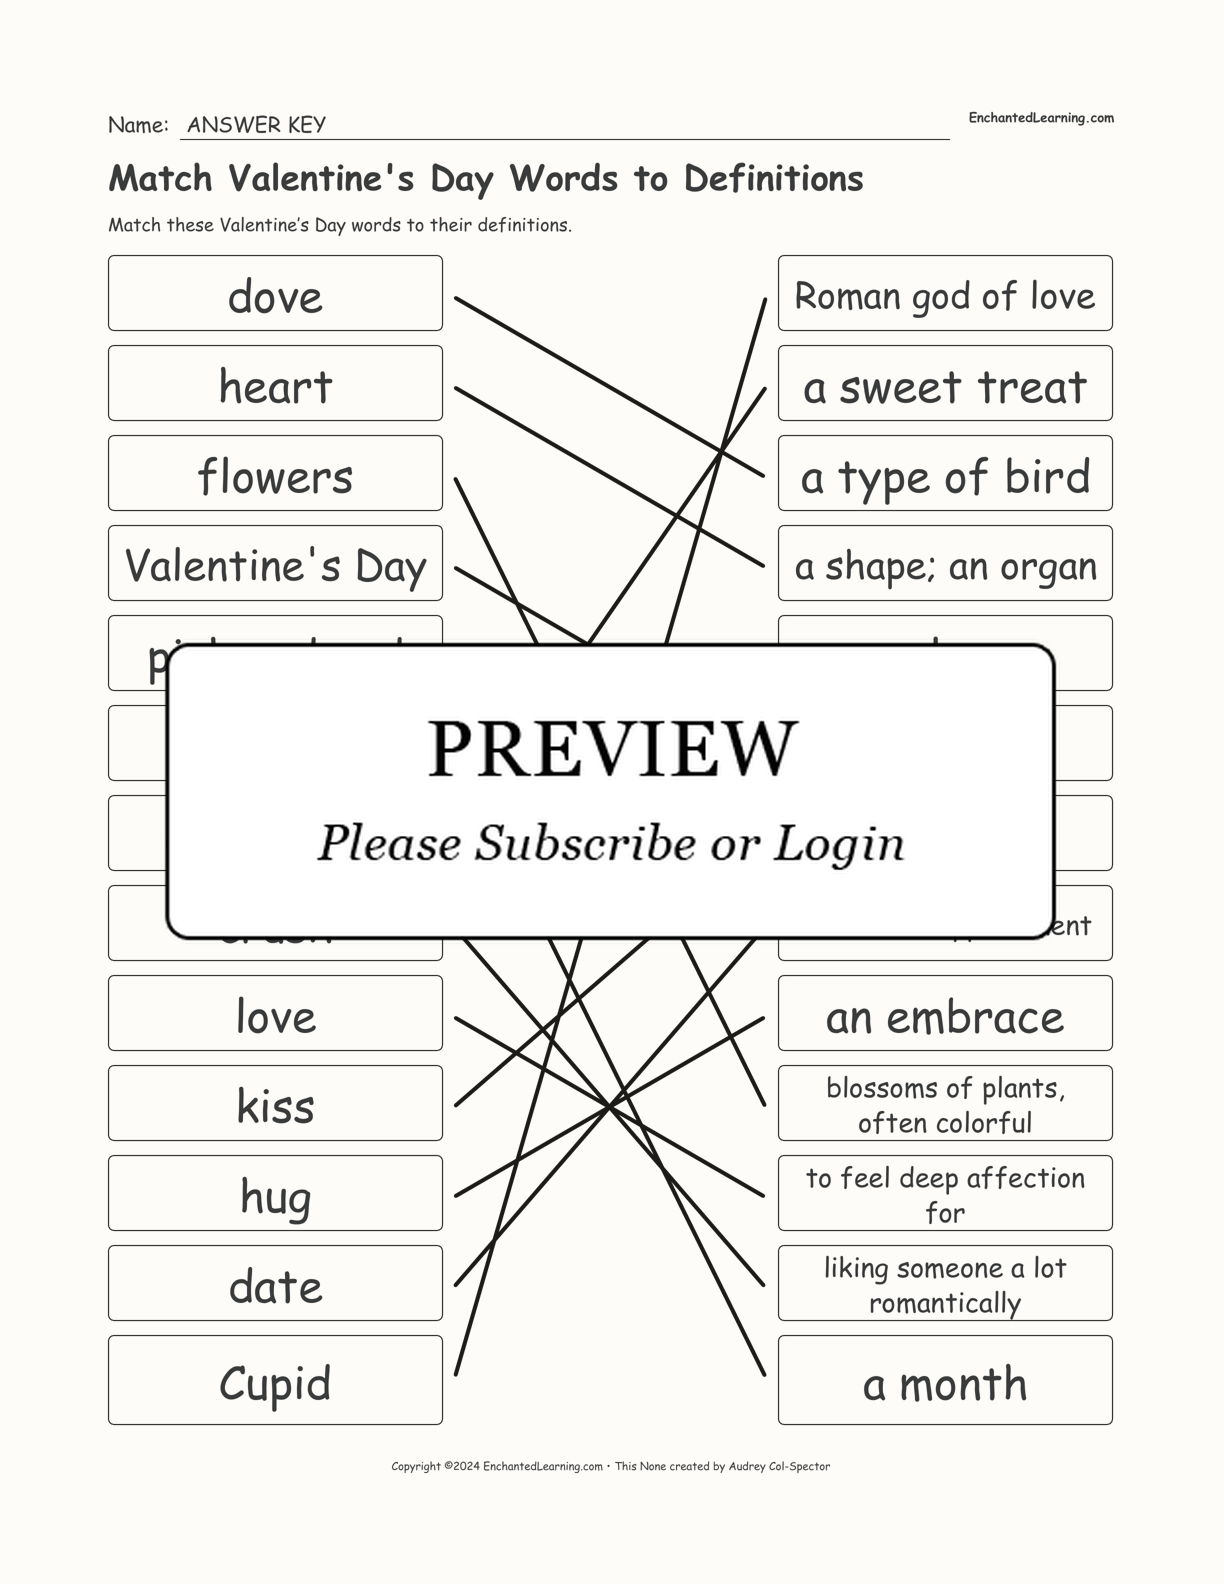 Match Valentine's Day Words to Definitions interactive worksheet page 2